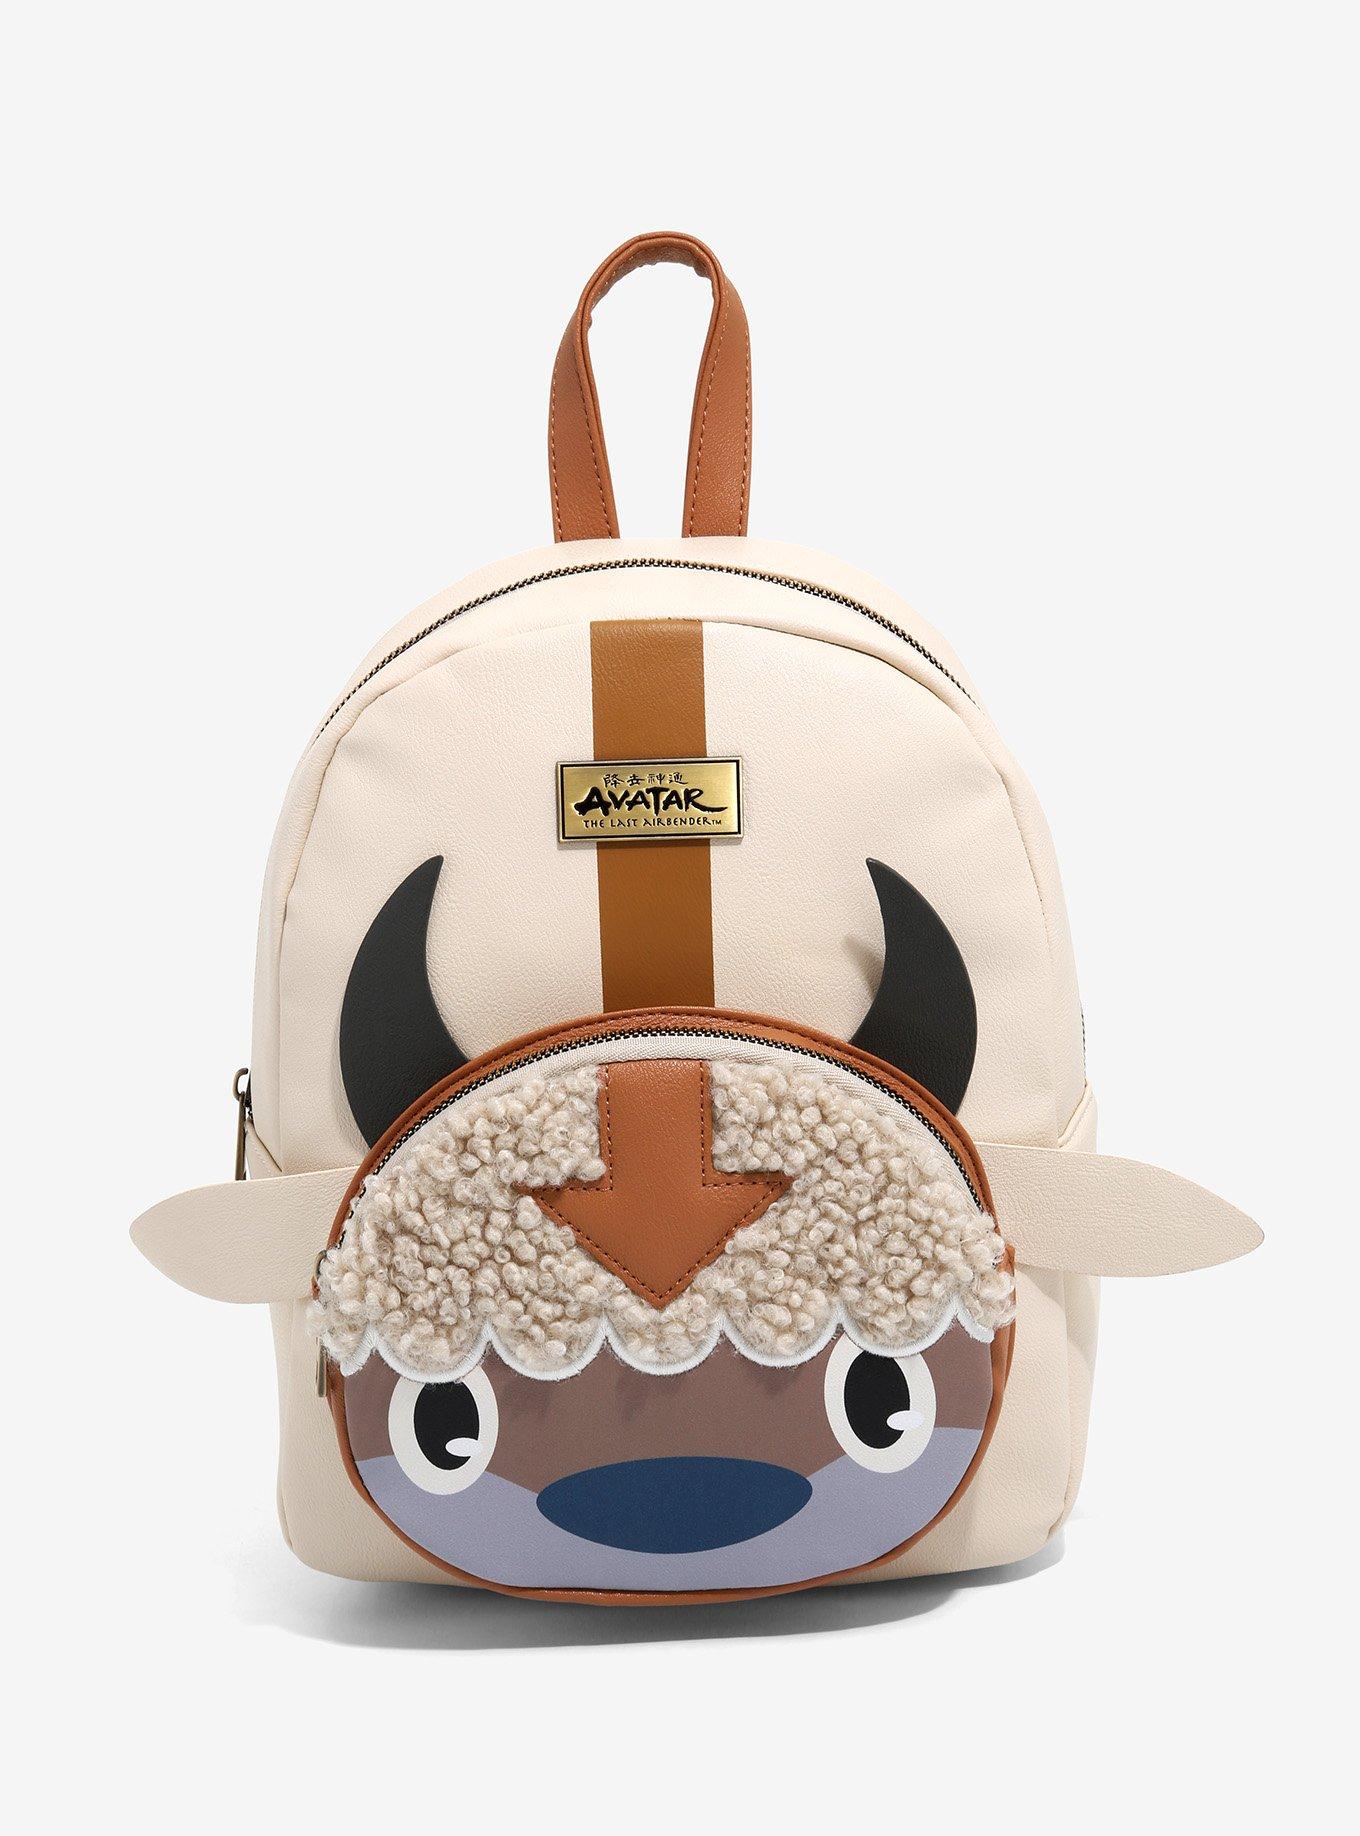 Avatar The Last Airbender The Fire Dance Mini Backpack